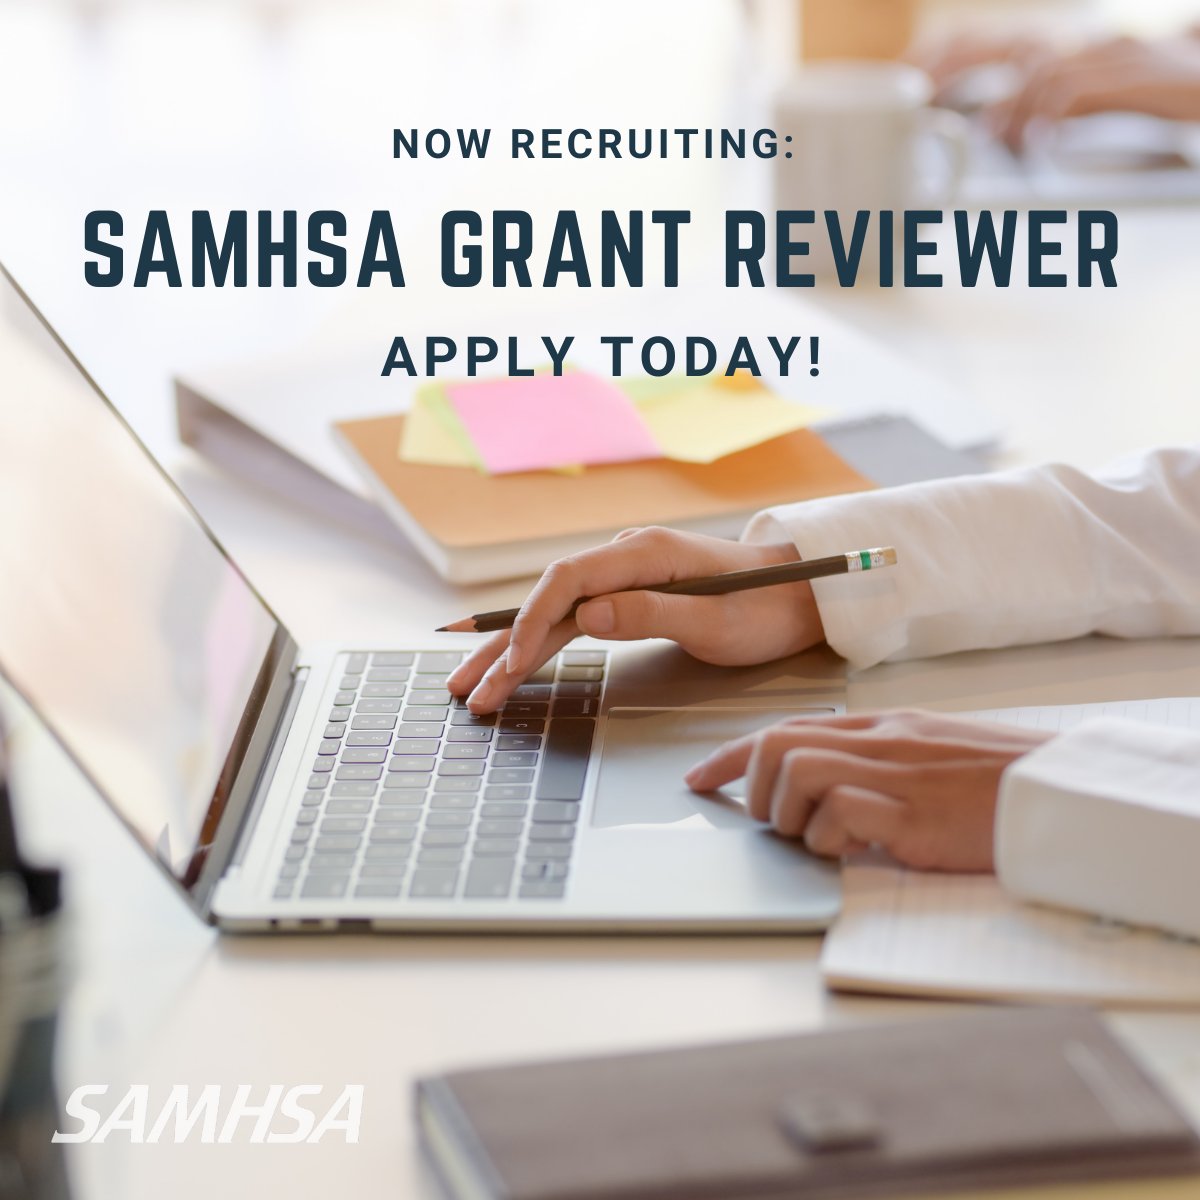 SAMHSA is now recruiting grant peer reviewers! Peer reviewers help to ensure that grant applications are evaluated through a fair, equitable, and objective process to provide SAMHSA and applicant organizations with accurate and honest feedback. More info: samhsa.gov/grants/review/…